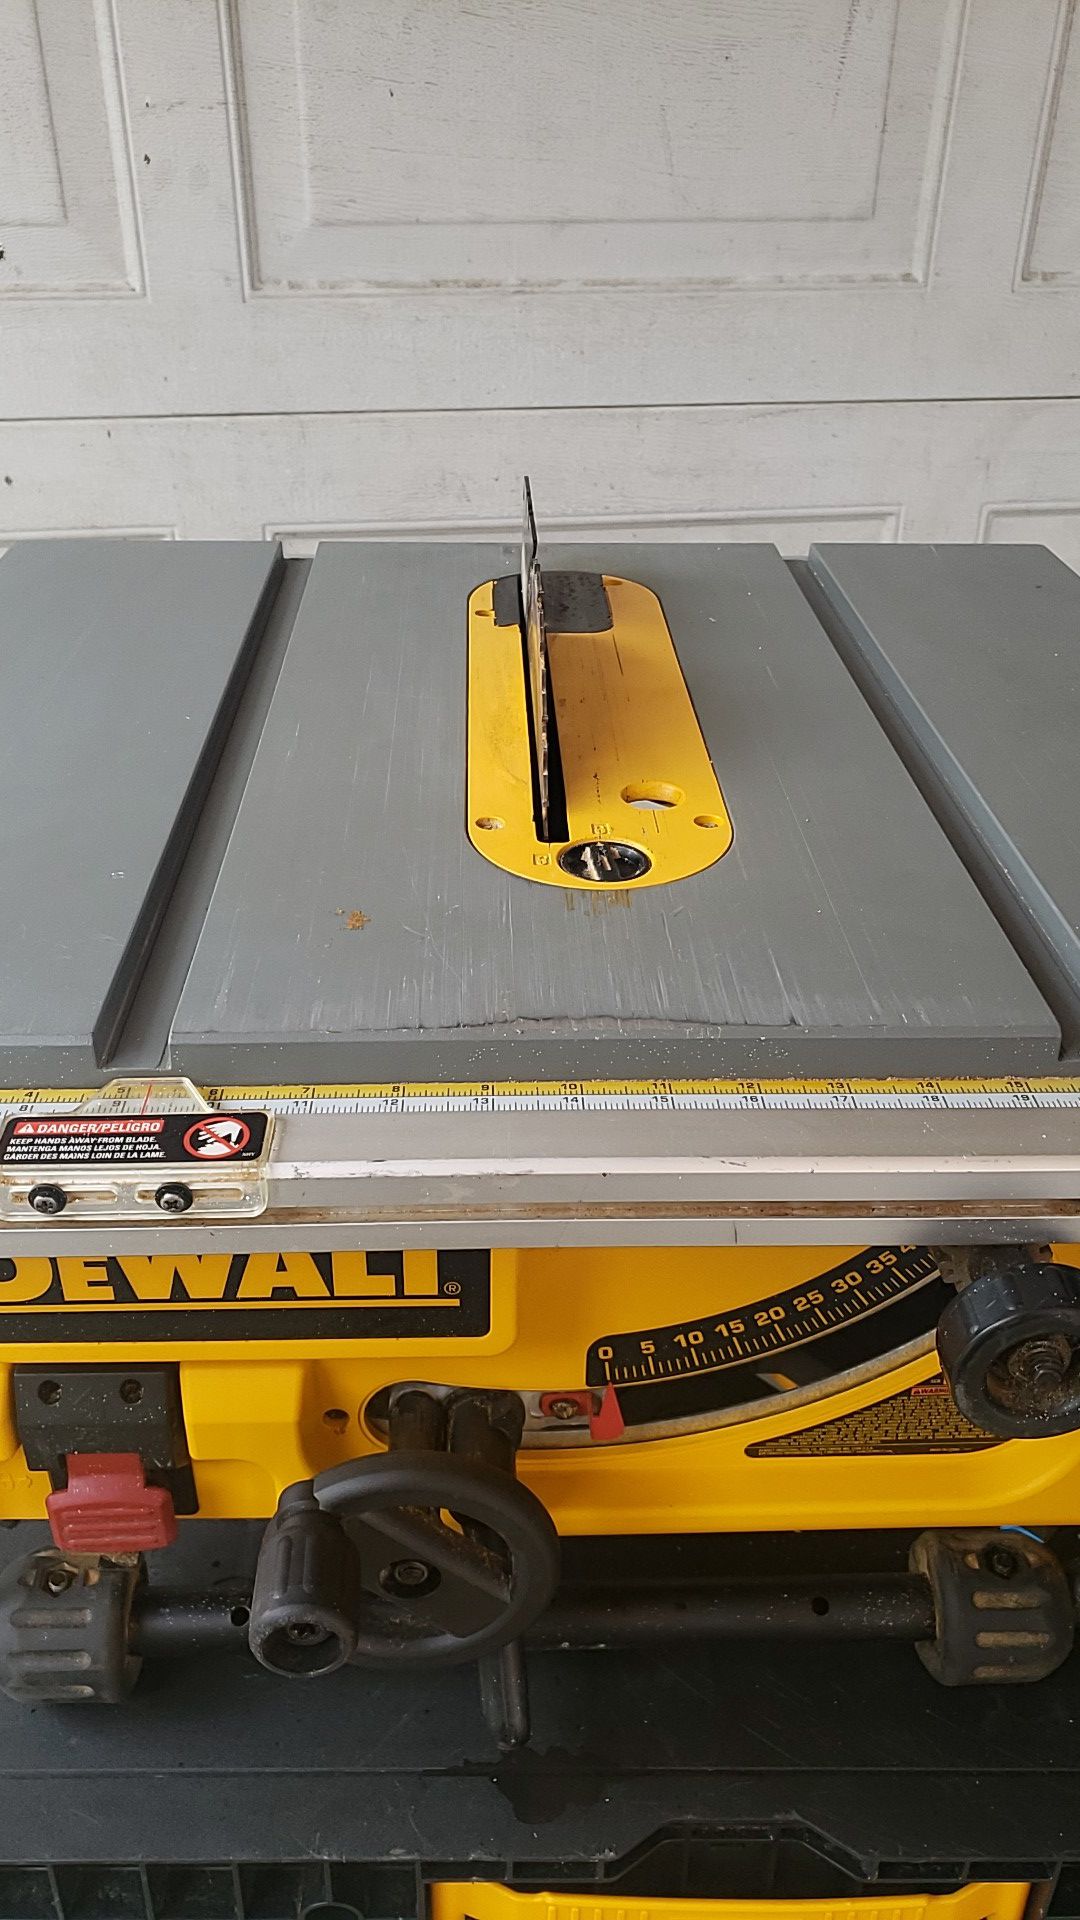 DEWALT TABLE SAW 10 " MISSING THE FENCE GUIDE